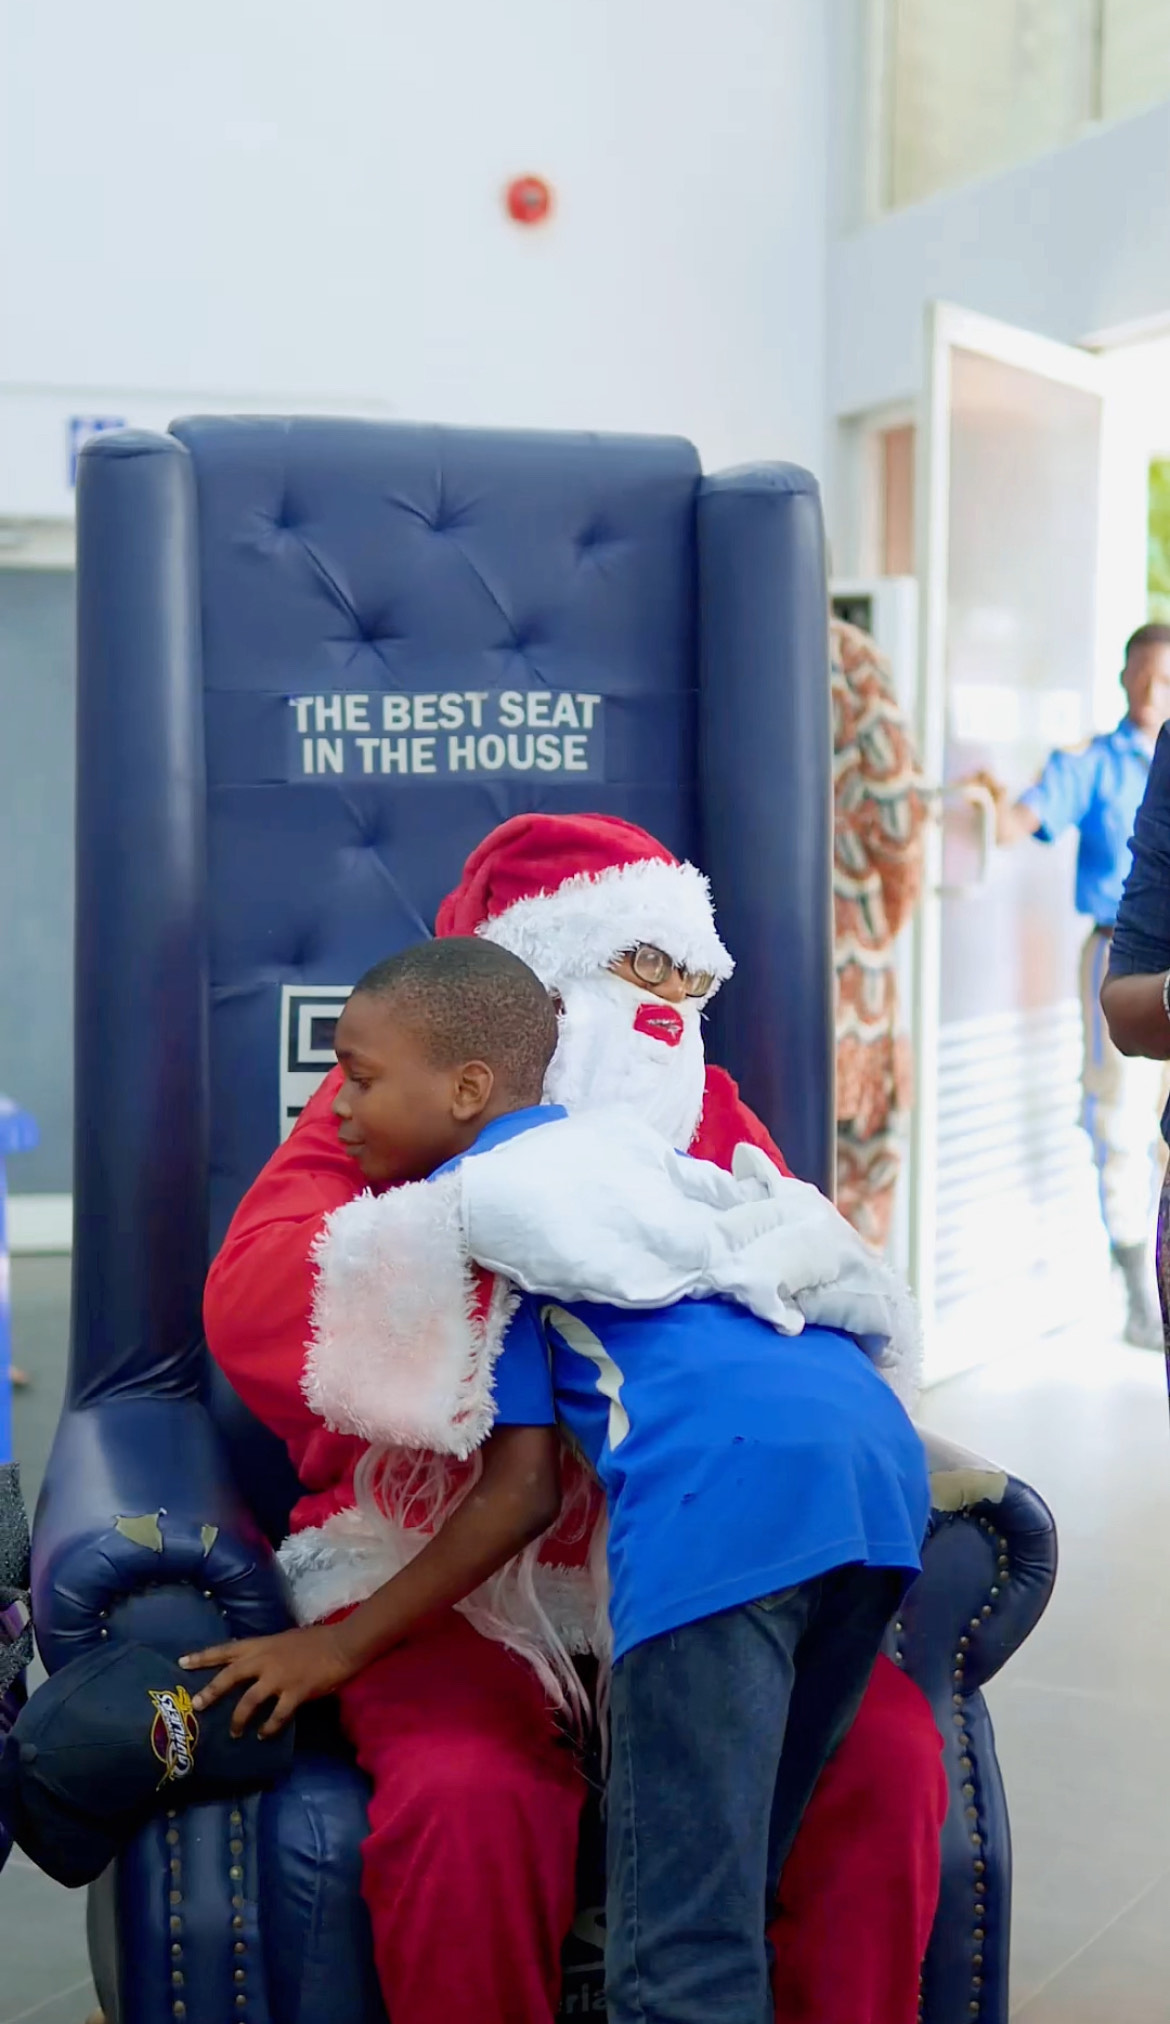 MultiChoice Spreads Holiday Cheer with Surprise Santa and Gifts for Customers